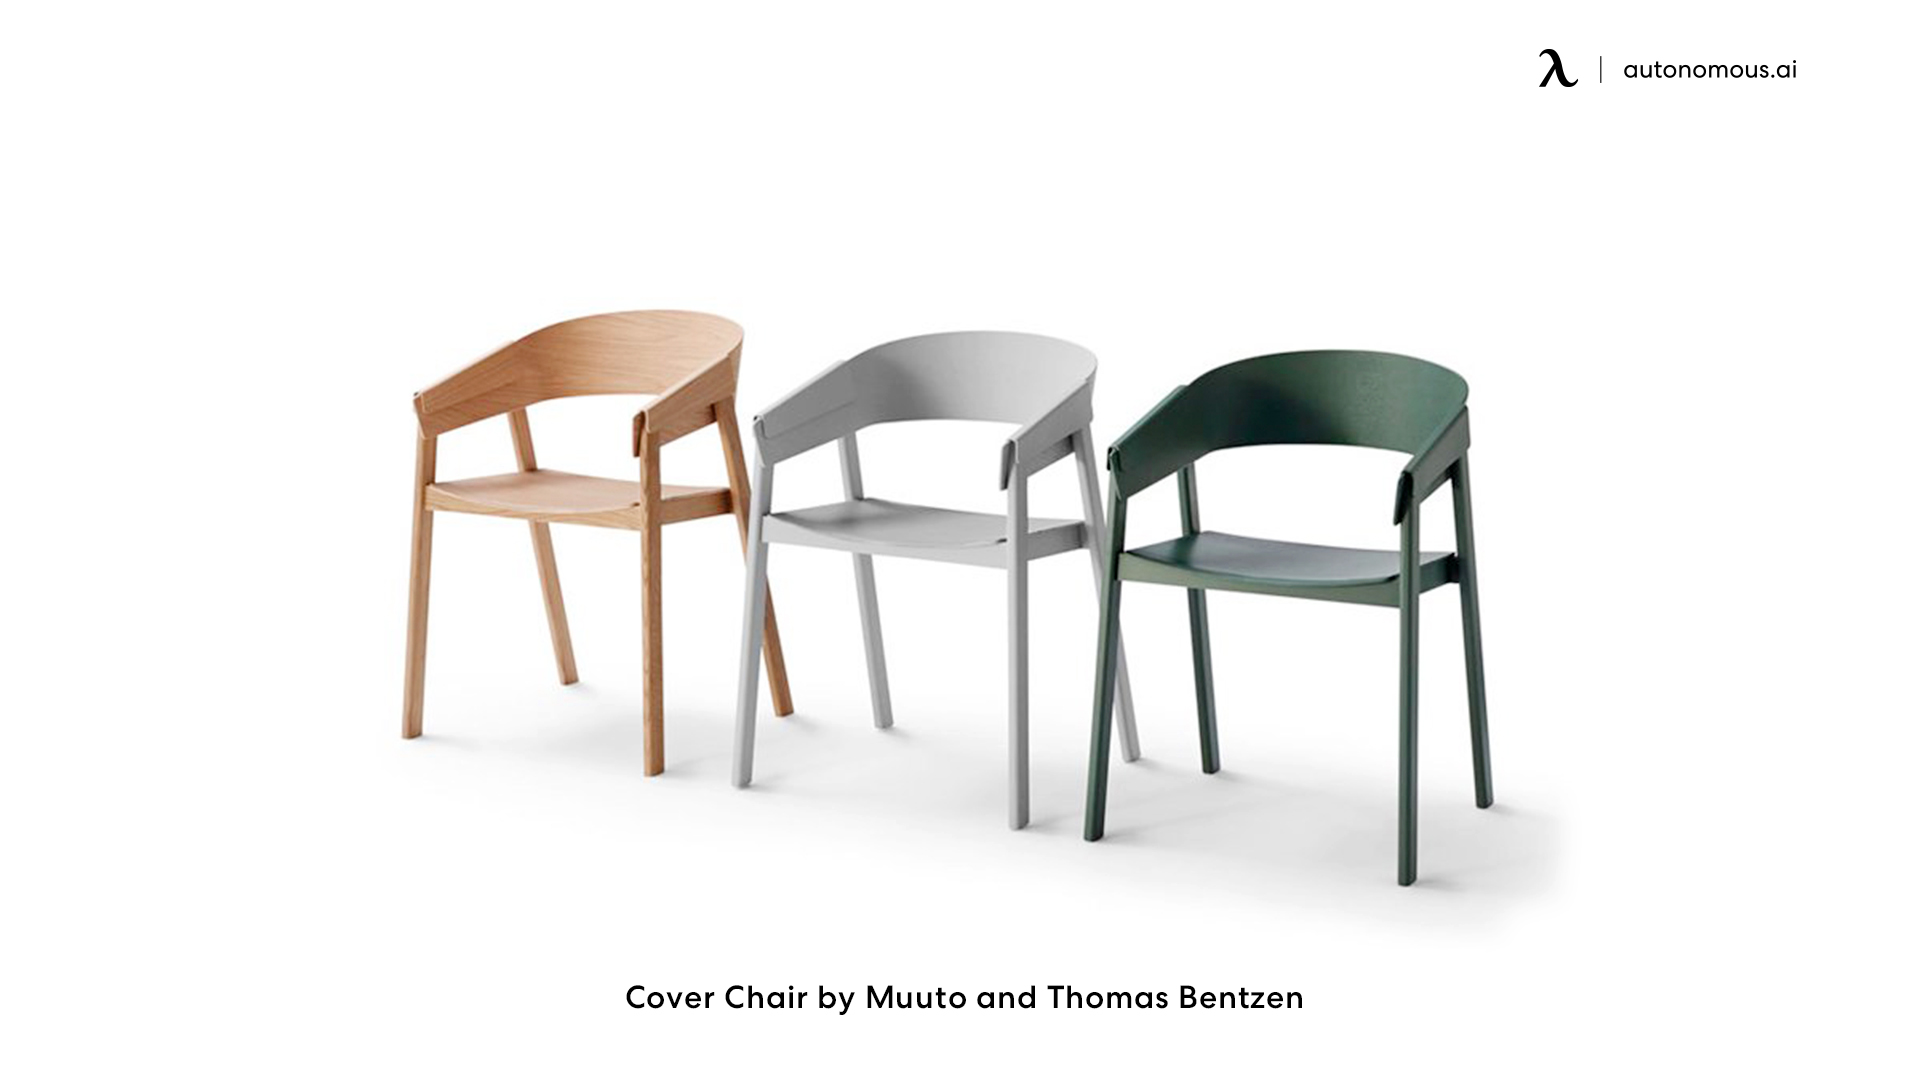 Cover Chair by Muuto and Thomas Bentzen